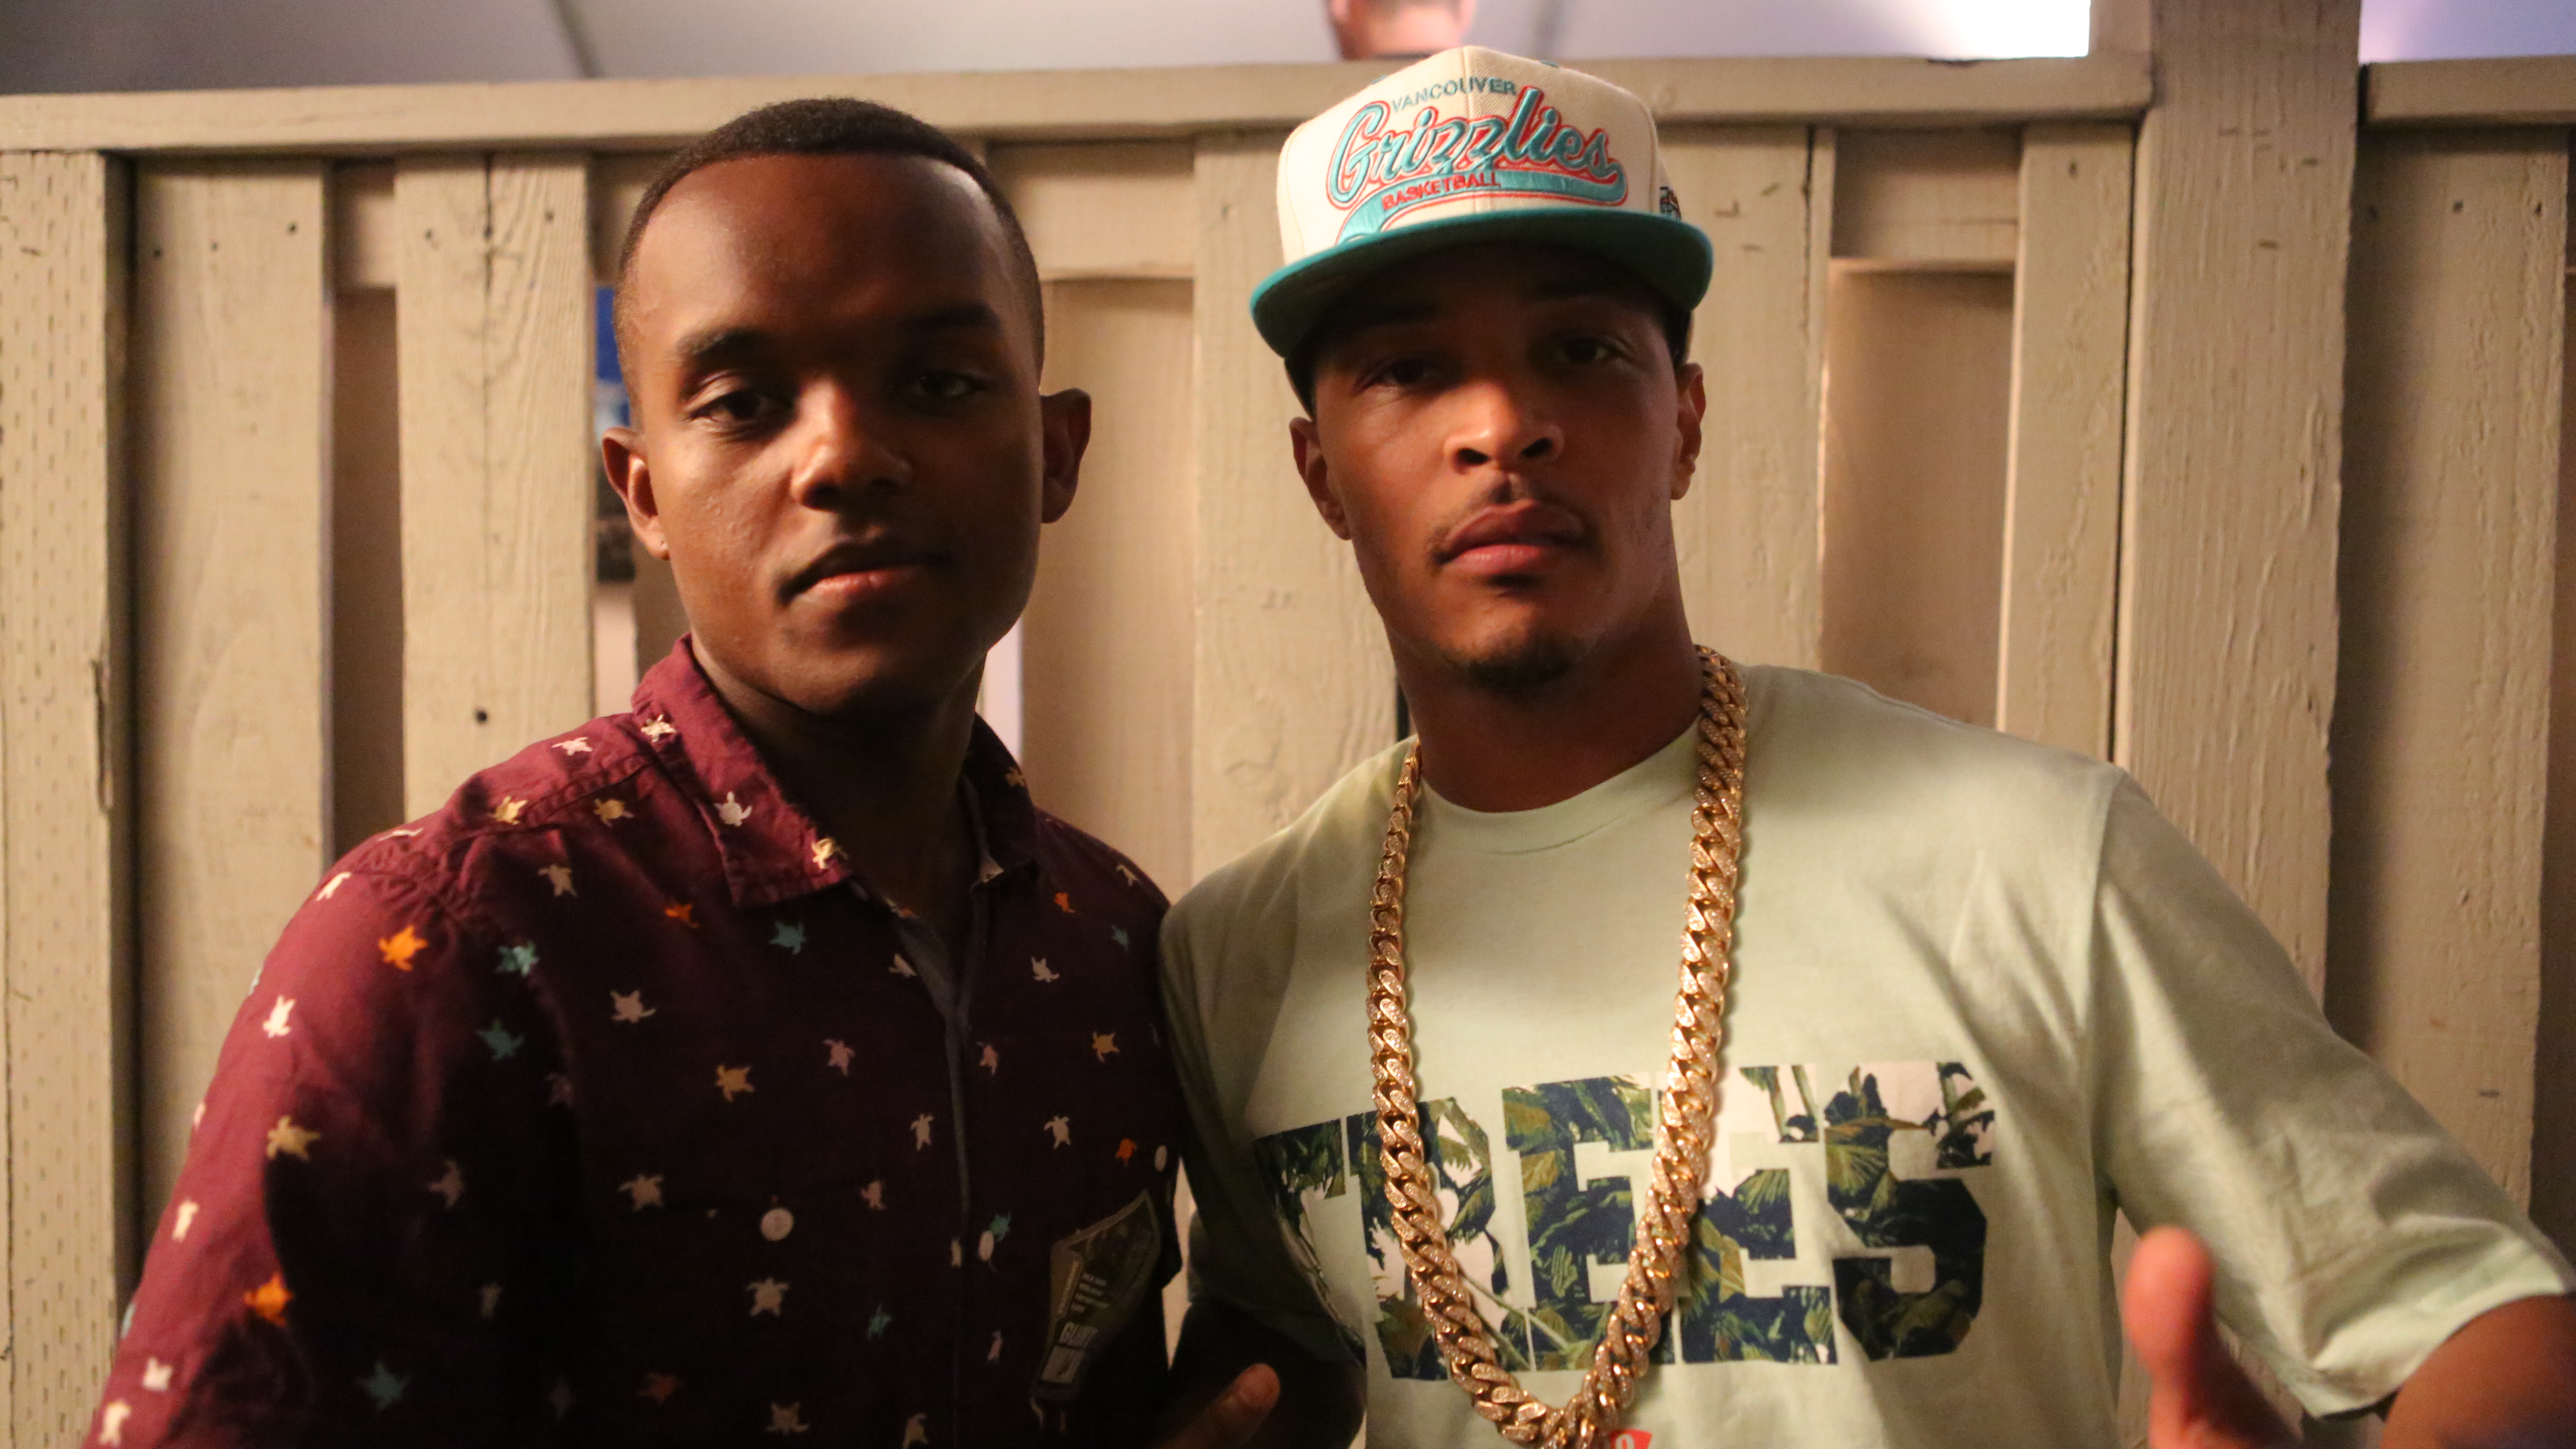 T.I. and I backstage|America's Most Wanted Tour(2013)